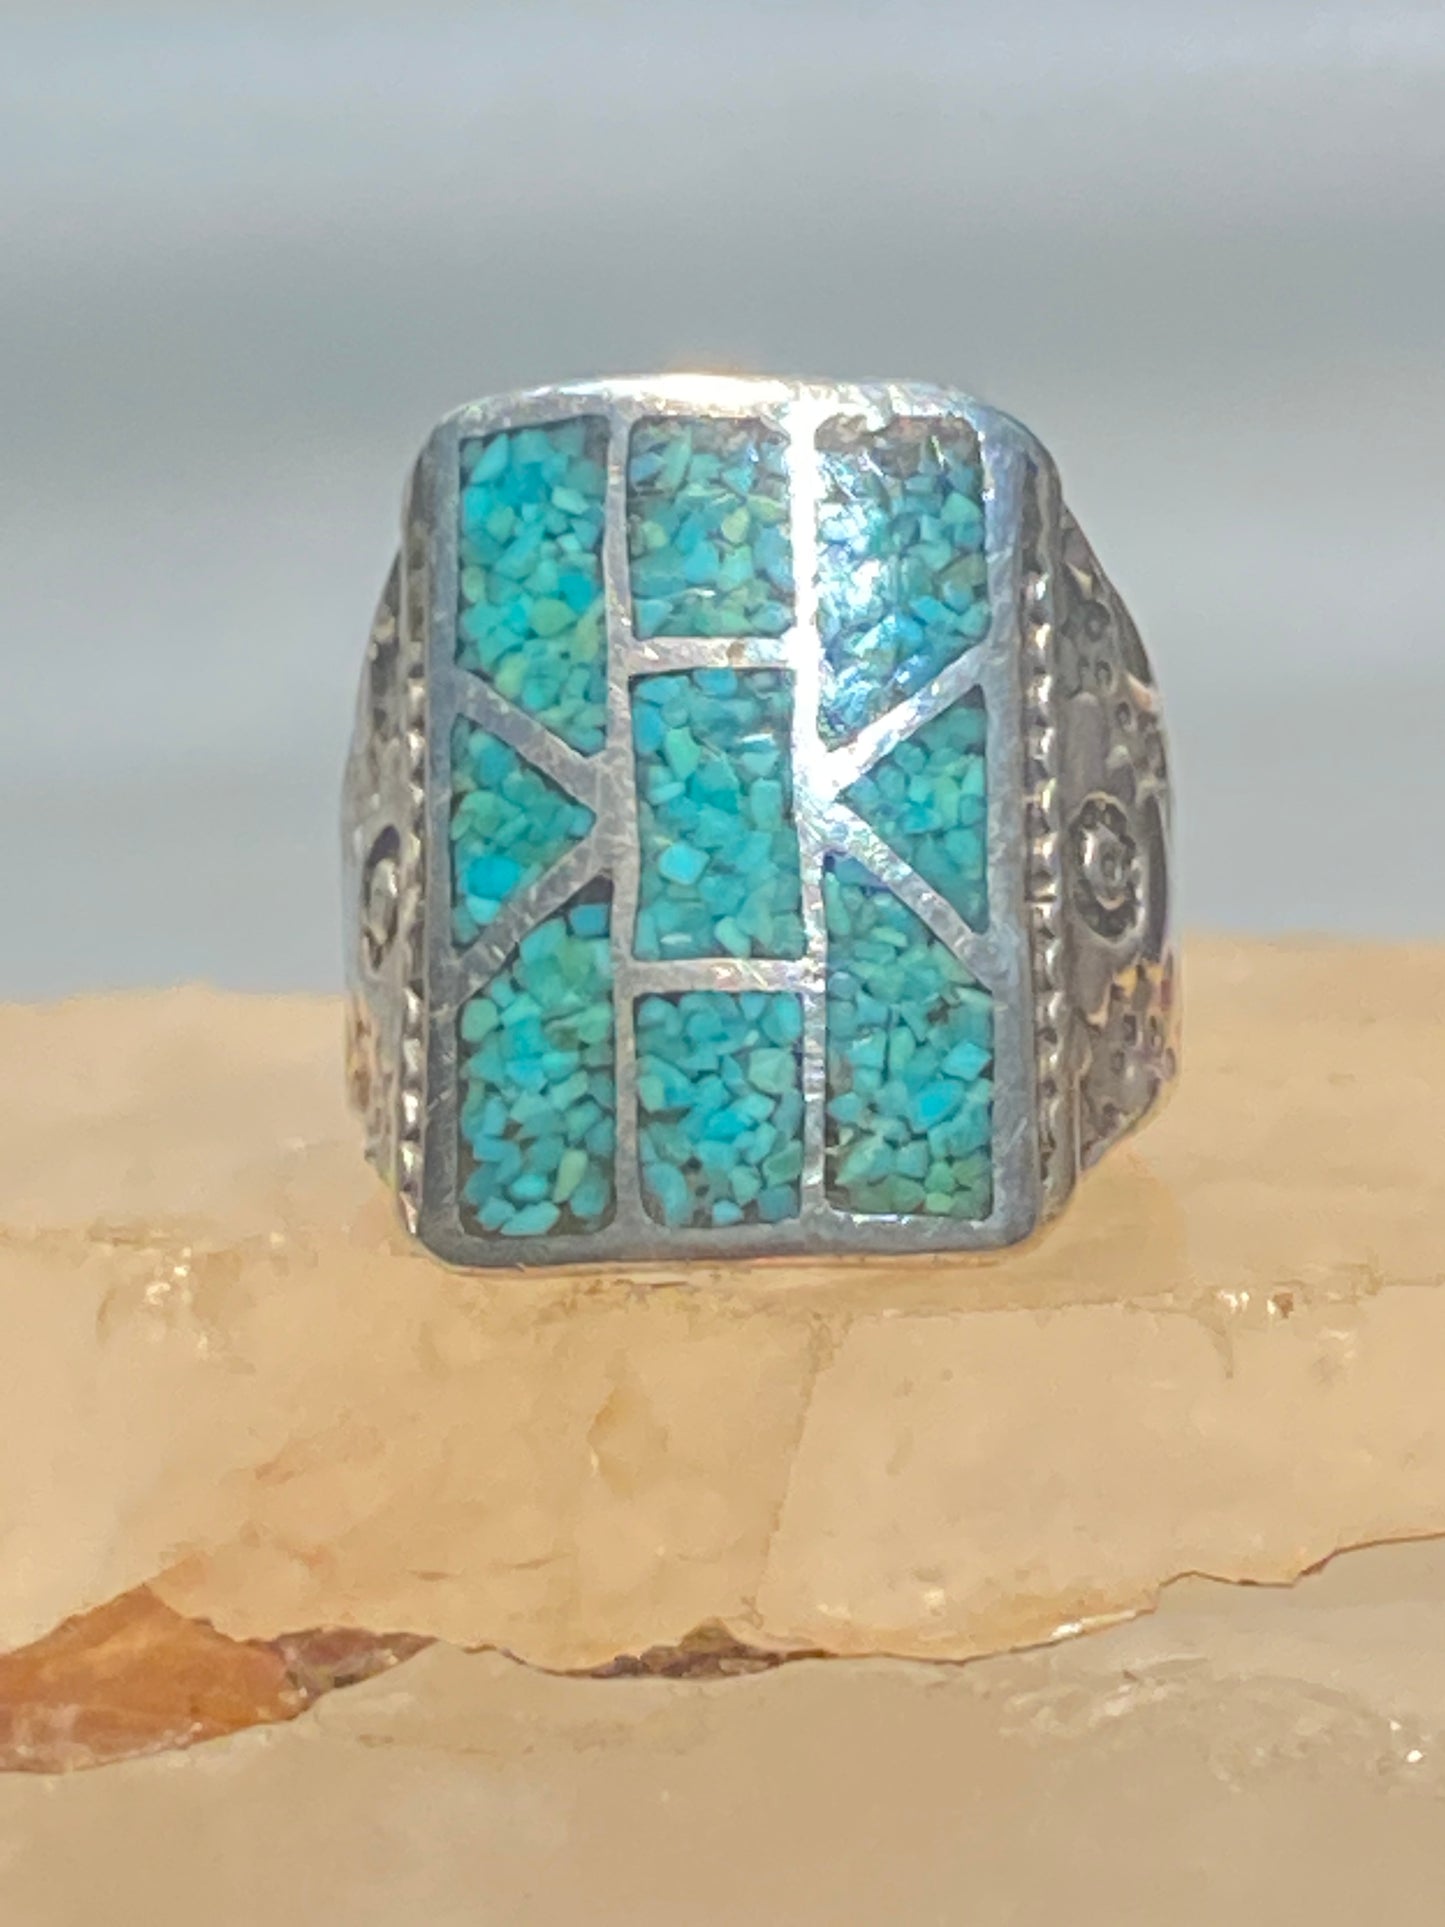 Turquoise mosaic ring size 7.75 sterling silver Tribal southwest women men